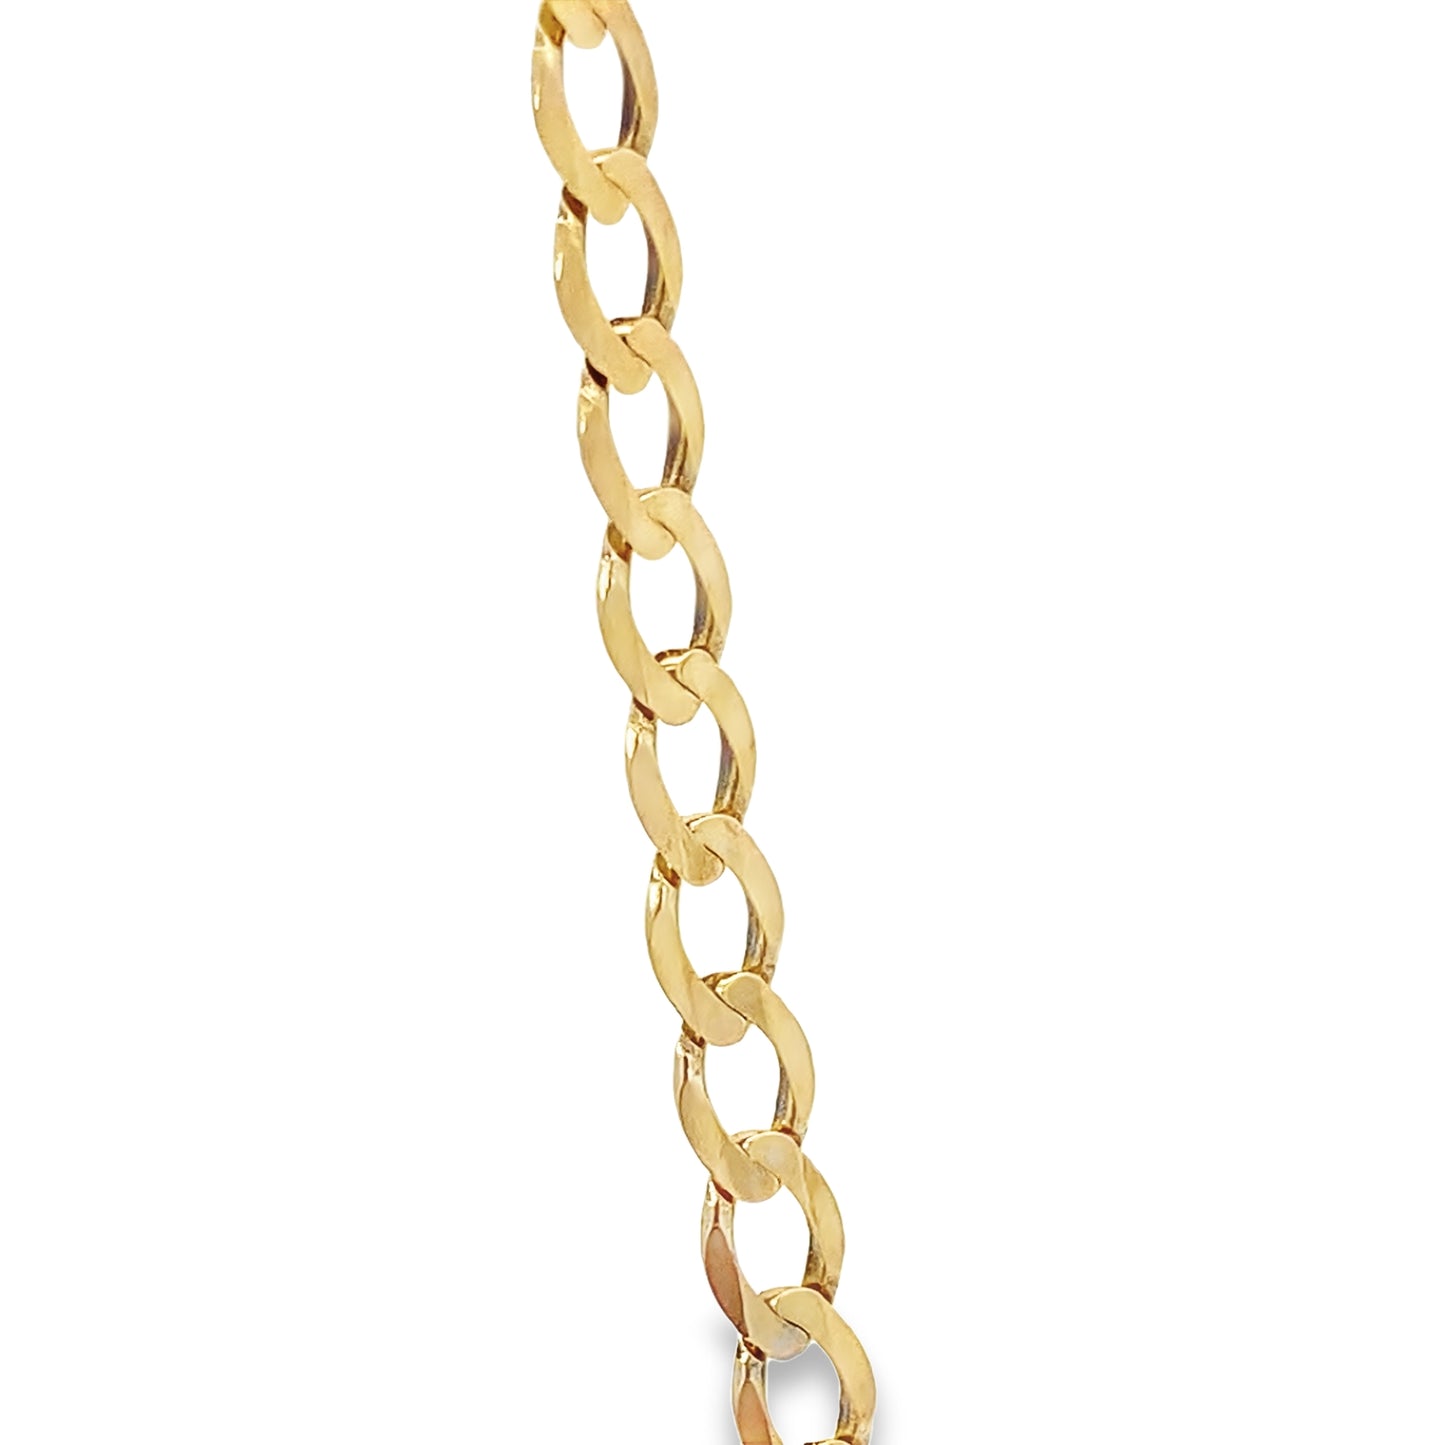 10K Yellow Gold Curb Link Chain 3.5Mm 21In 4.4Dwt